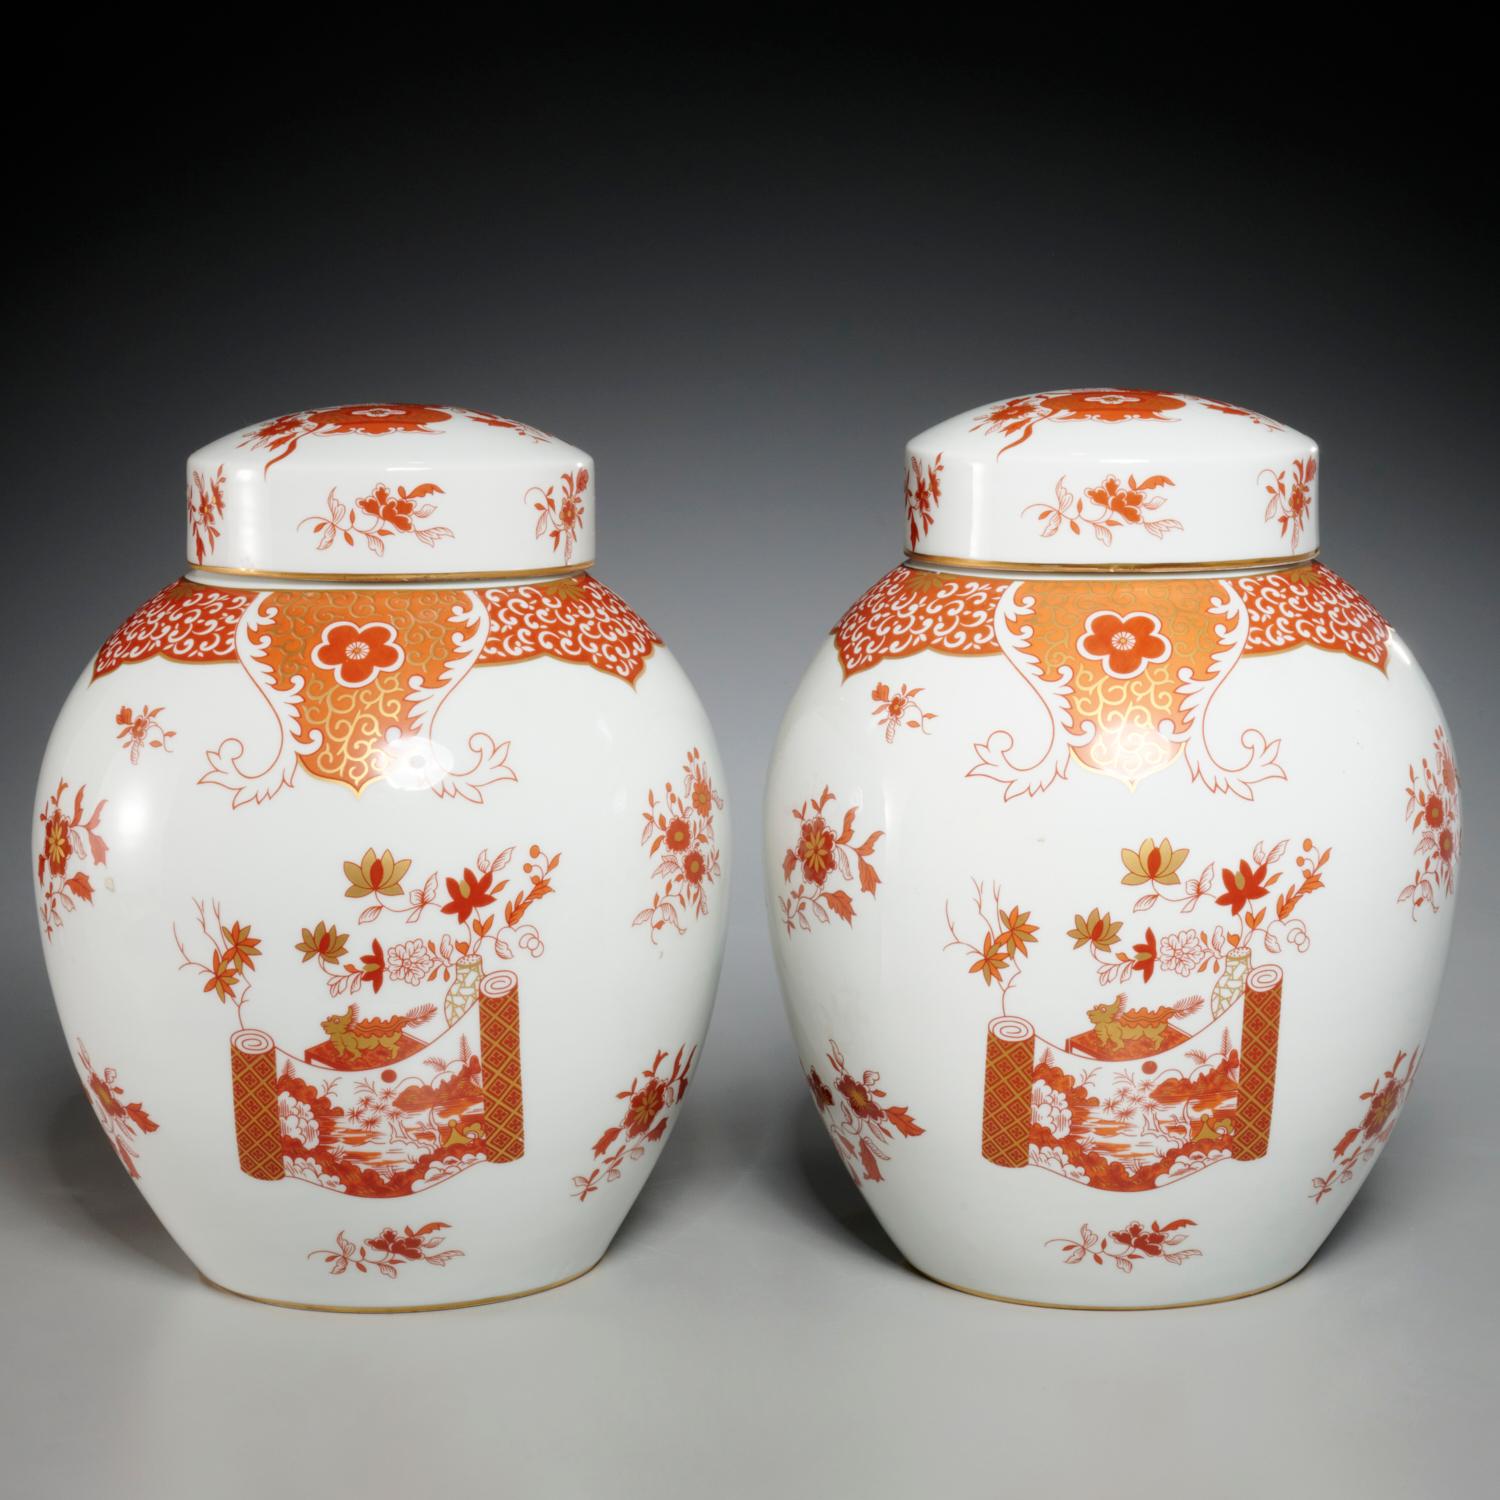 Mid 20th C. Kutani Style French Porcelain Lidded Ginger Jars  - A Pair For Sale 3